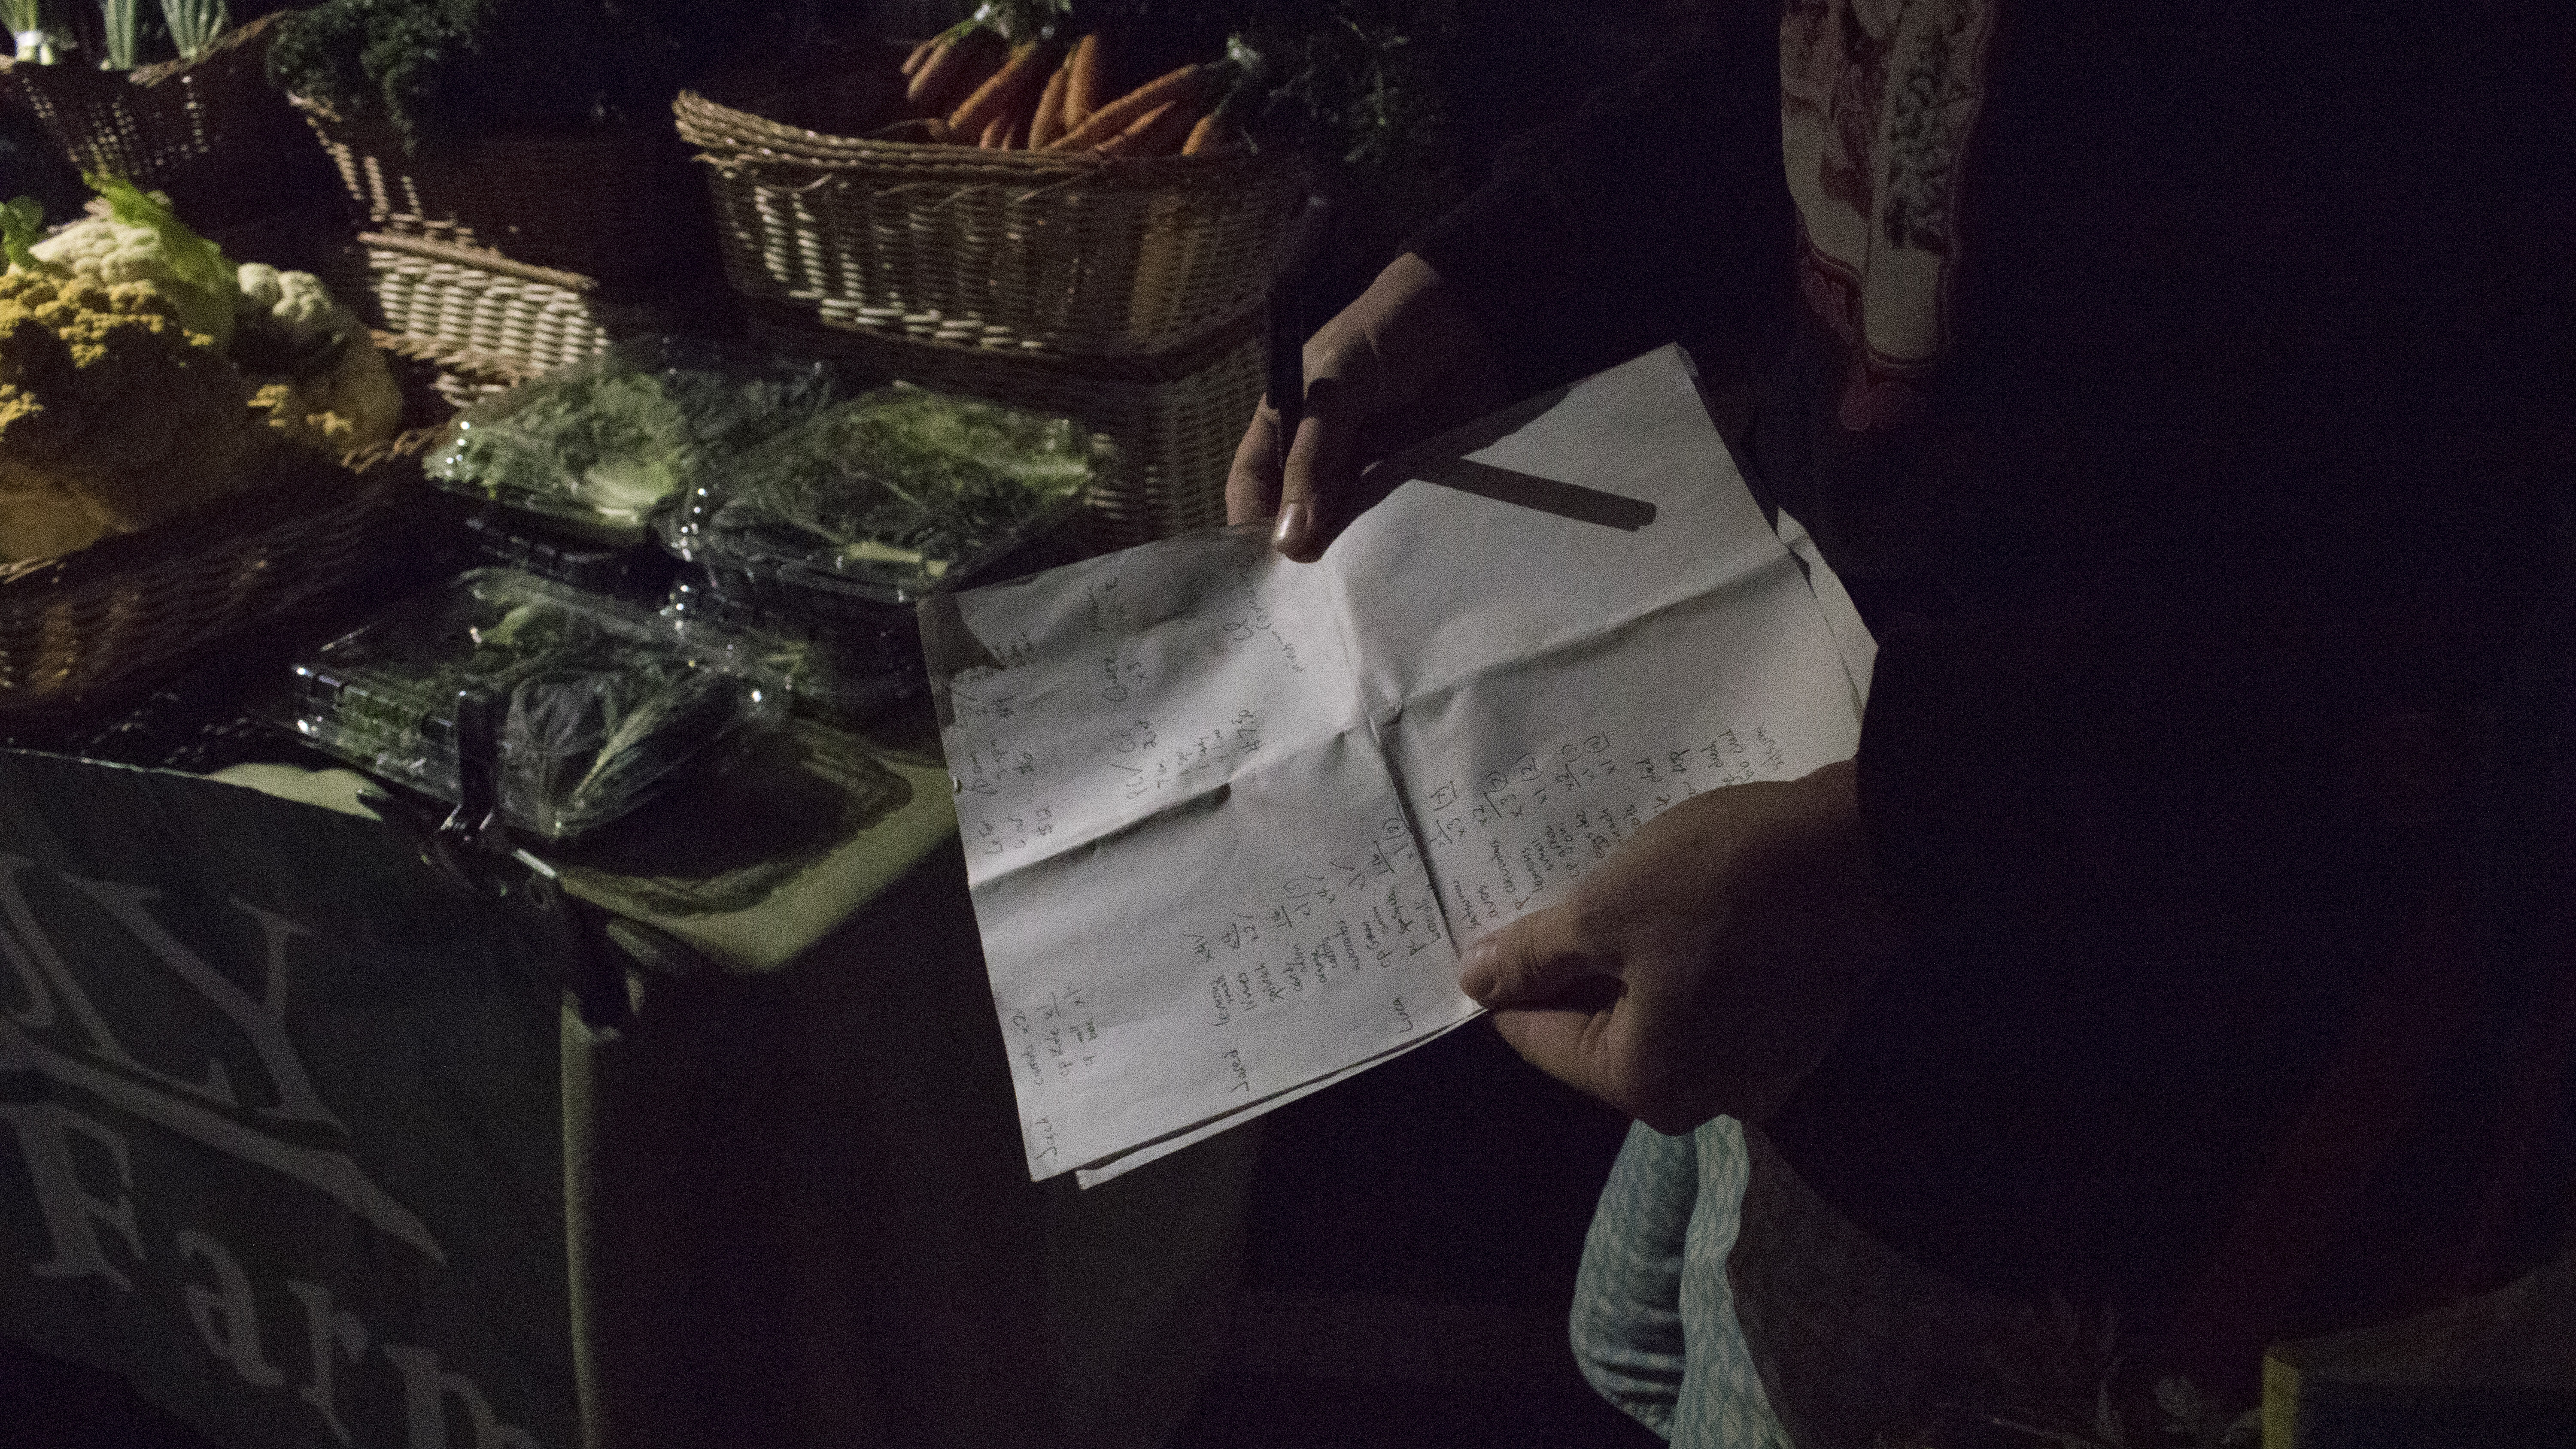 Joey Lyman references his grocery list with customer orders written down | Photo Credit: Megan Lynch